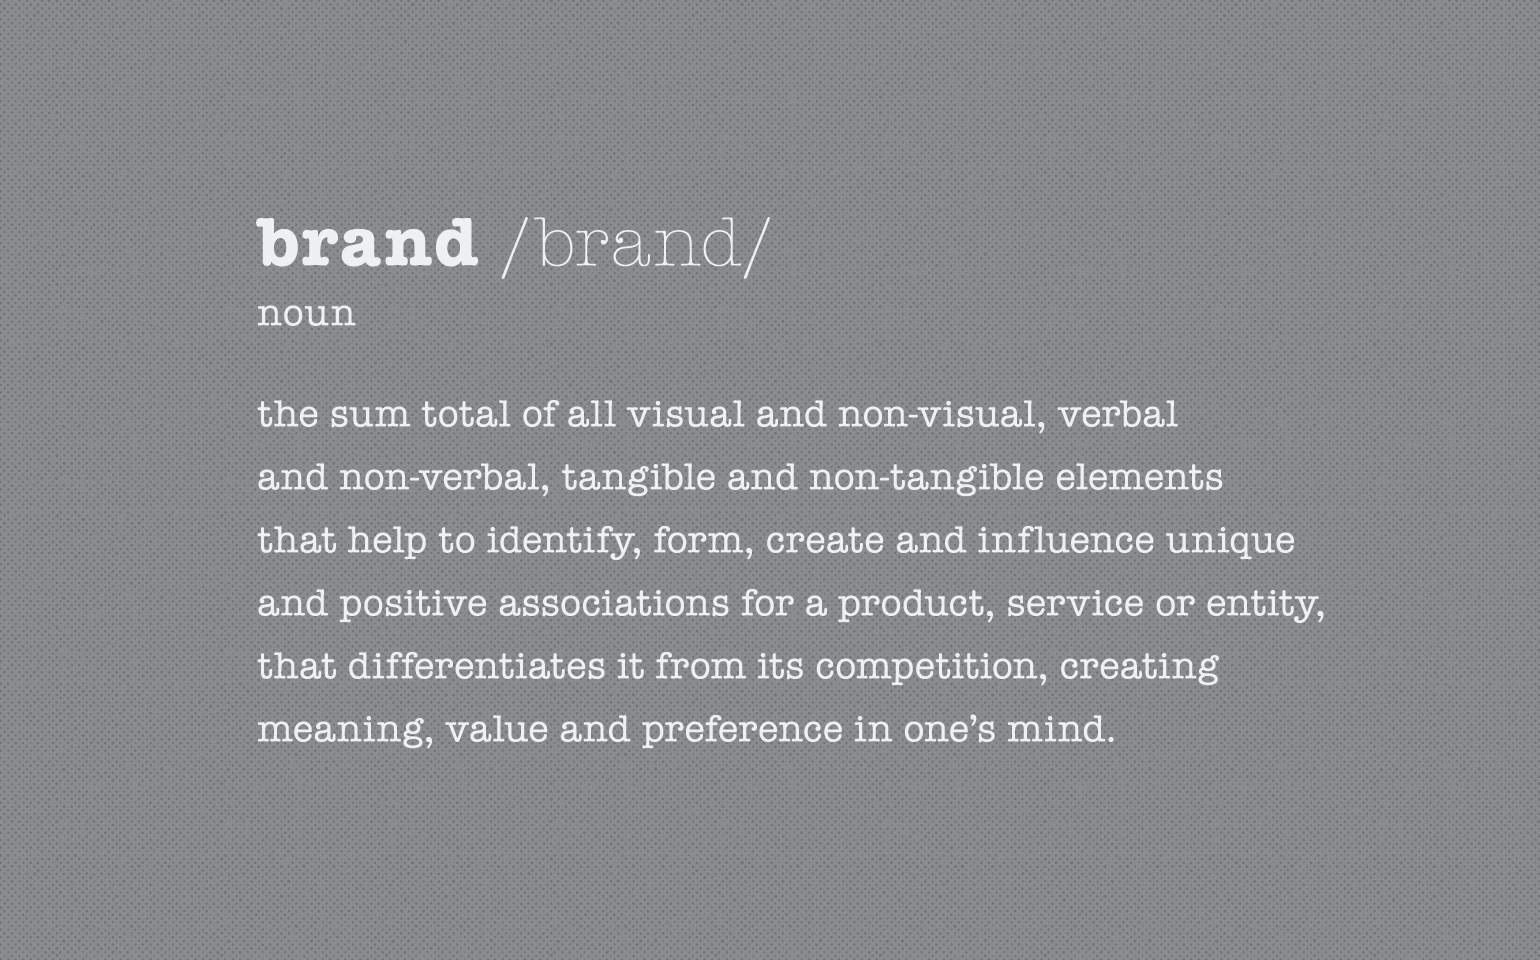 definition of brand